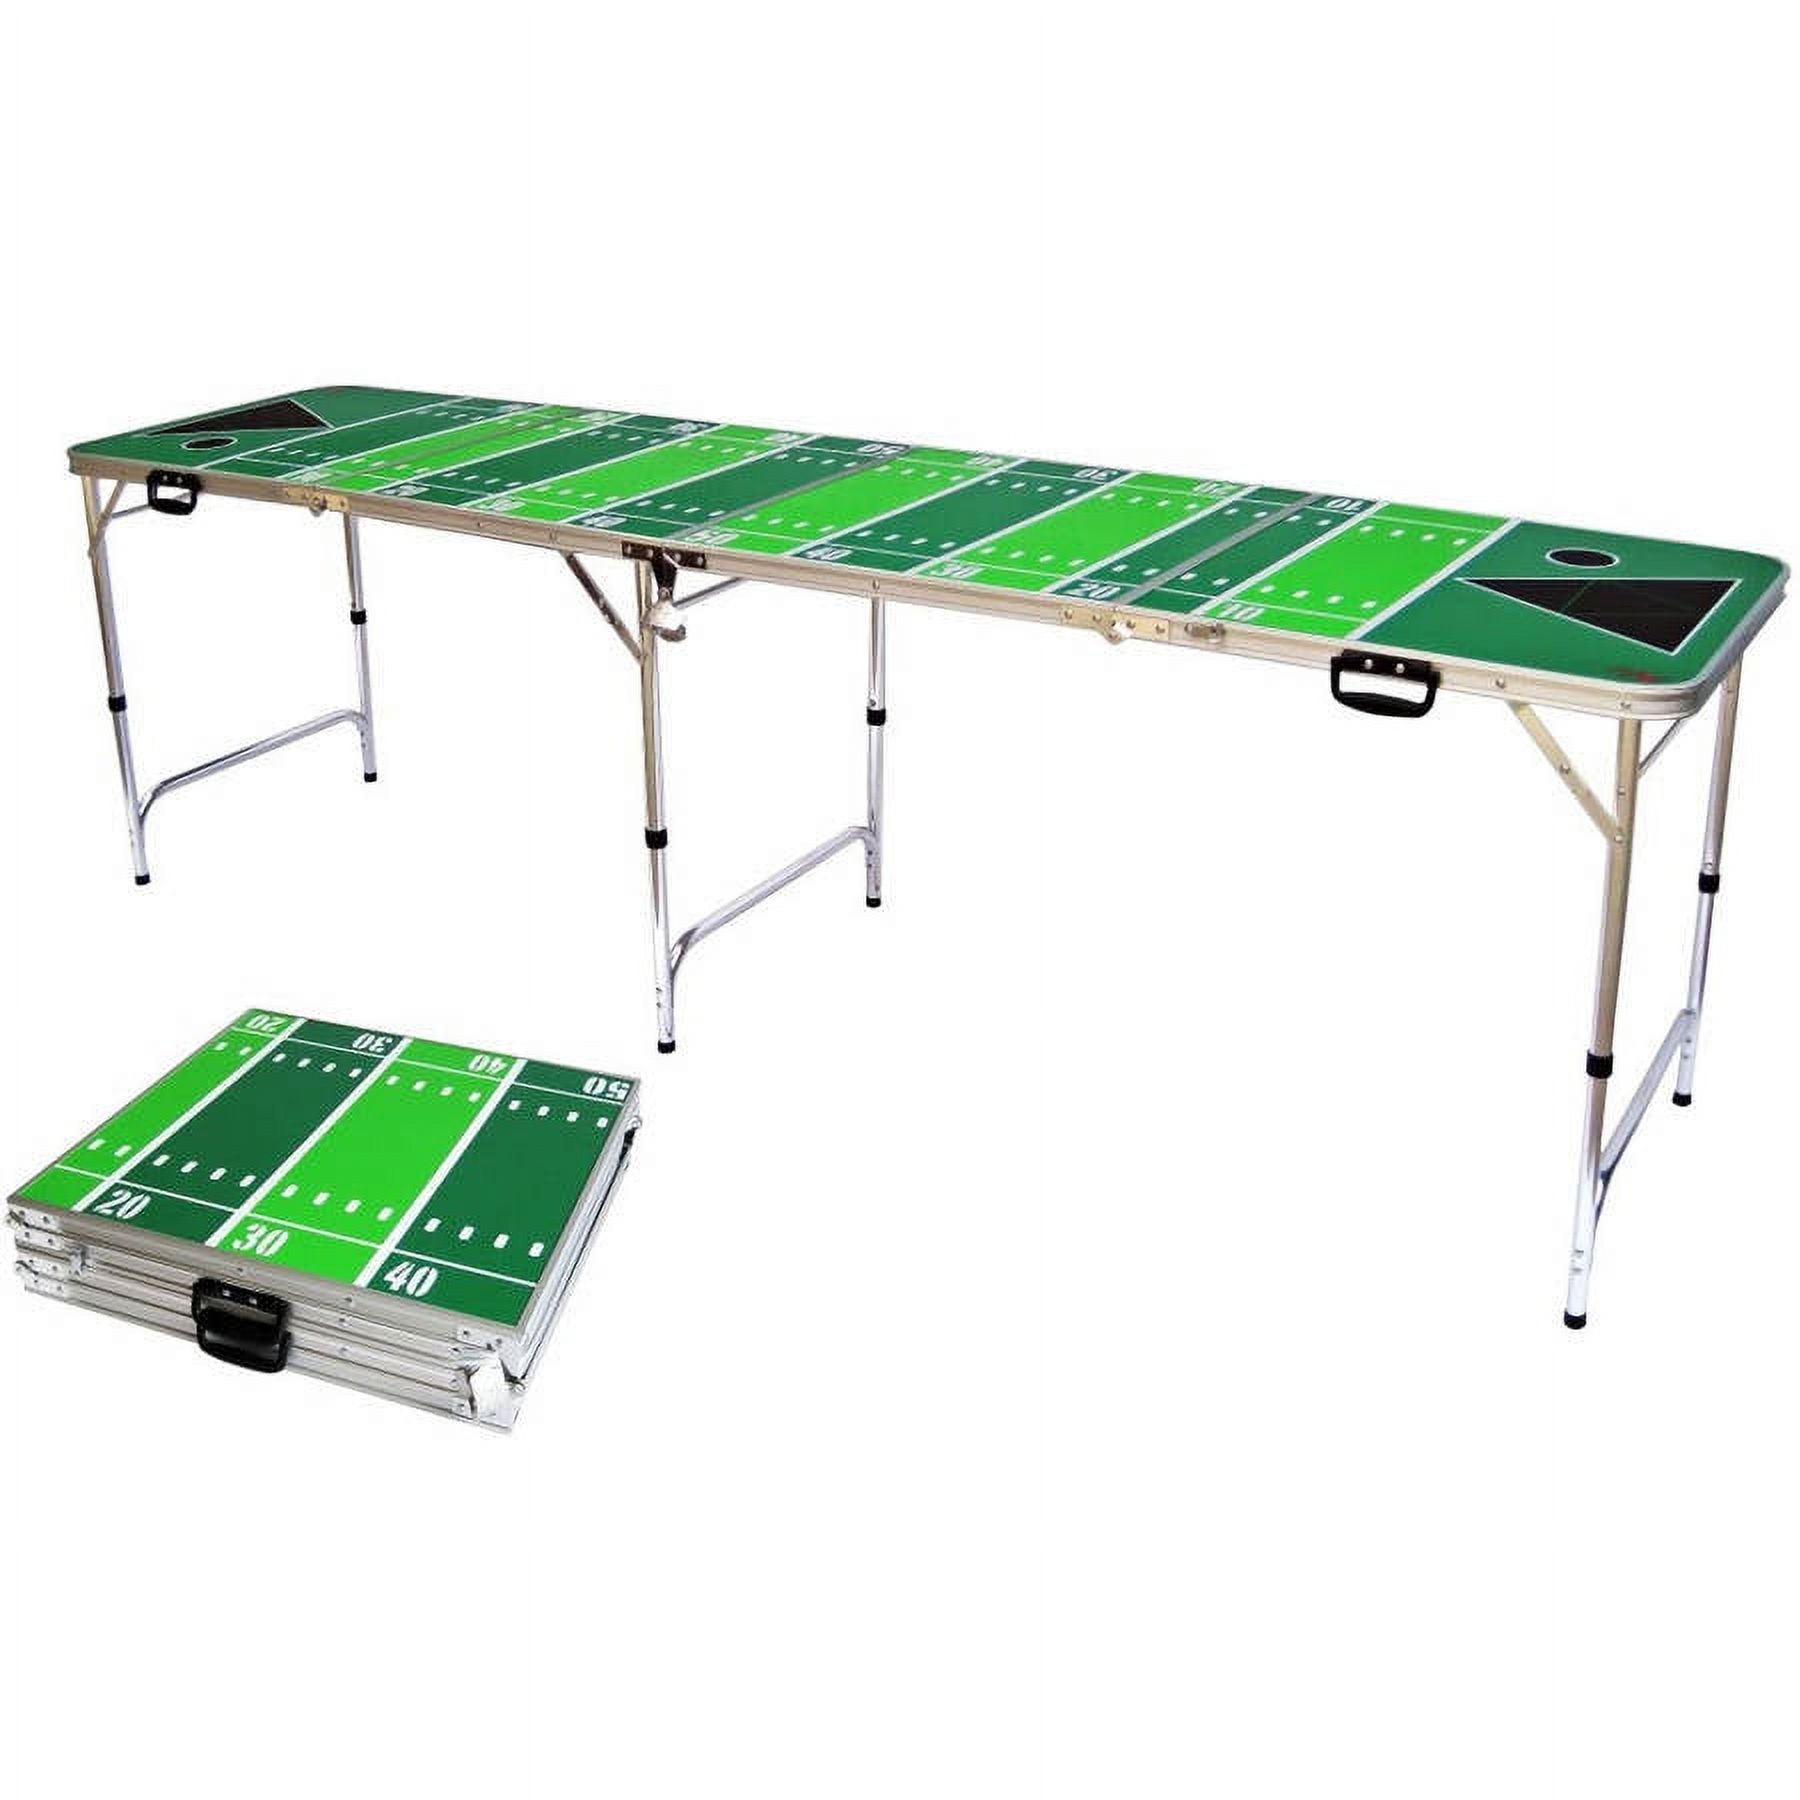 Football Tailgate Beer Pong Table - 8 Fe - image 1 of 1